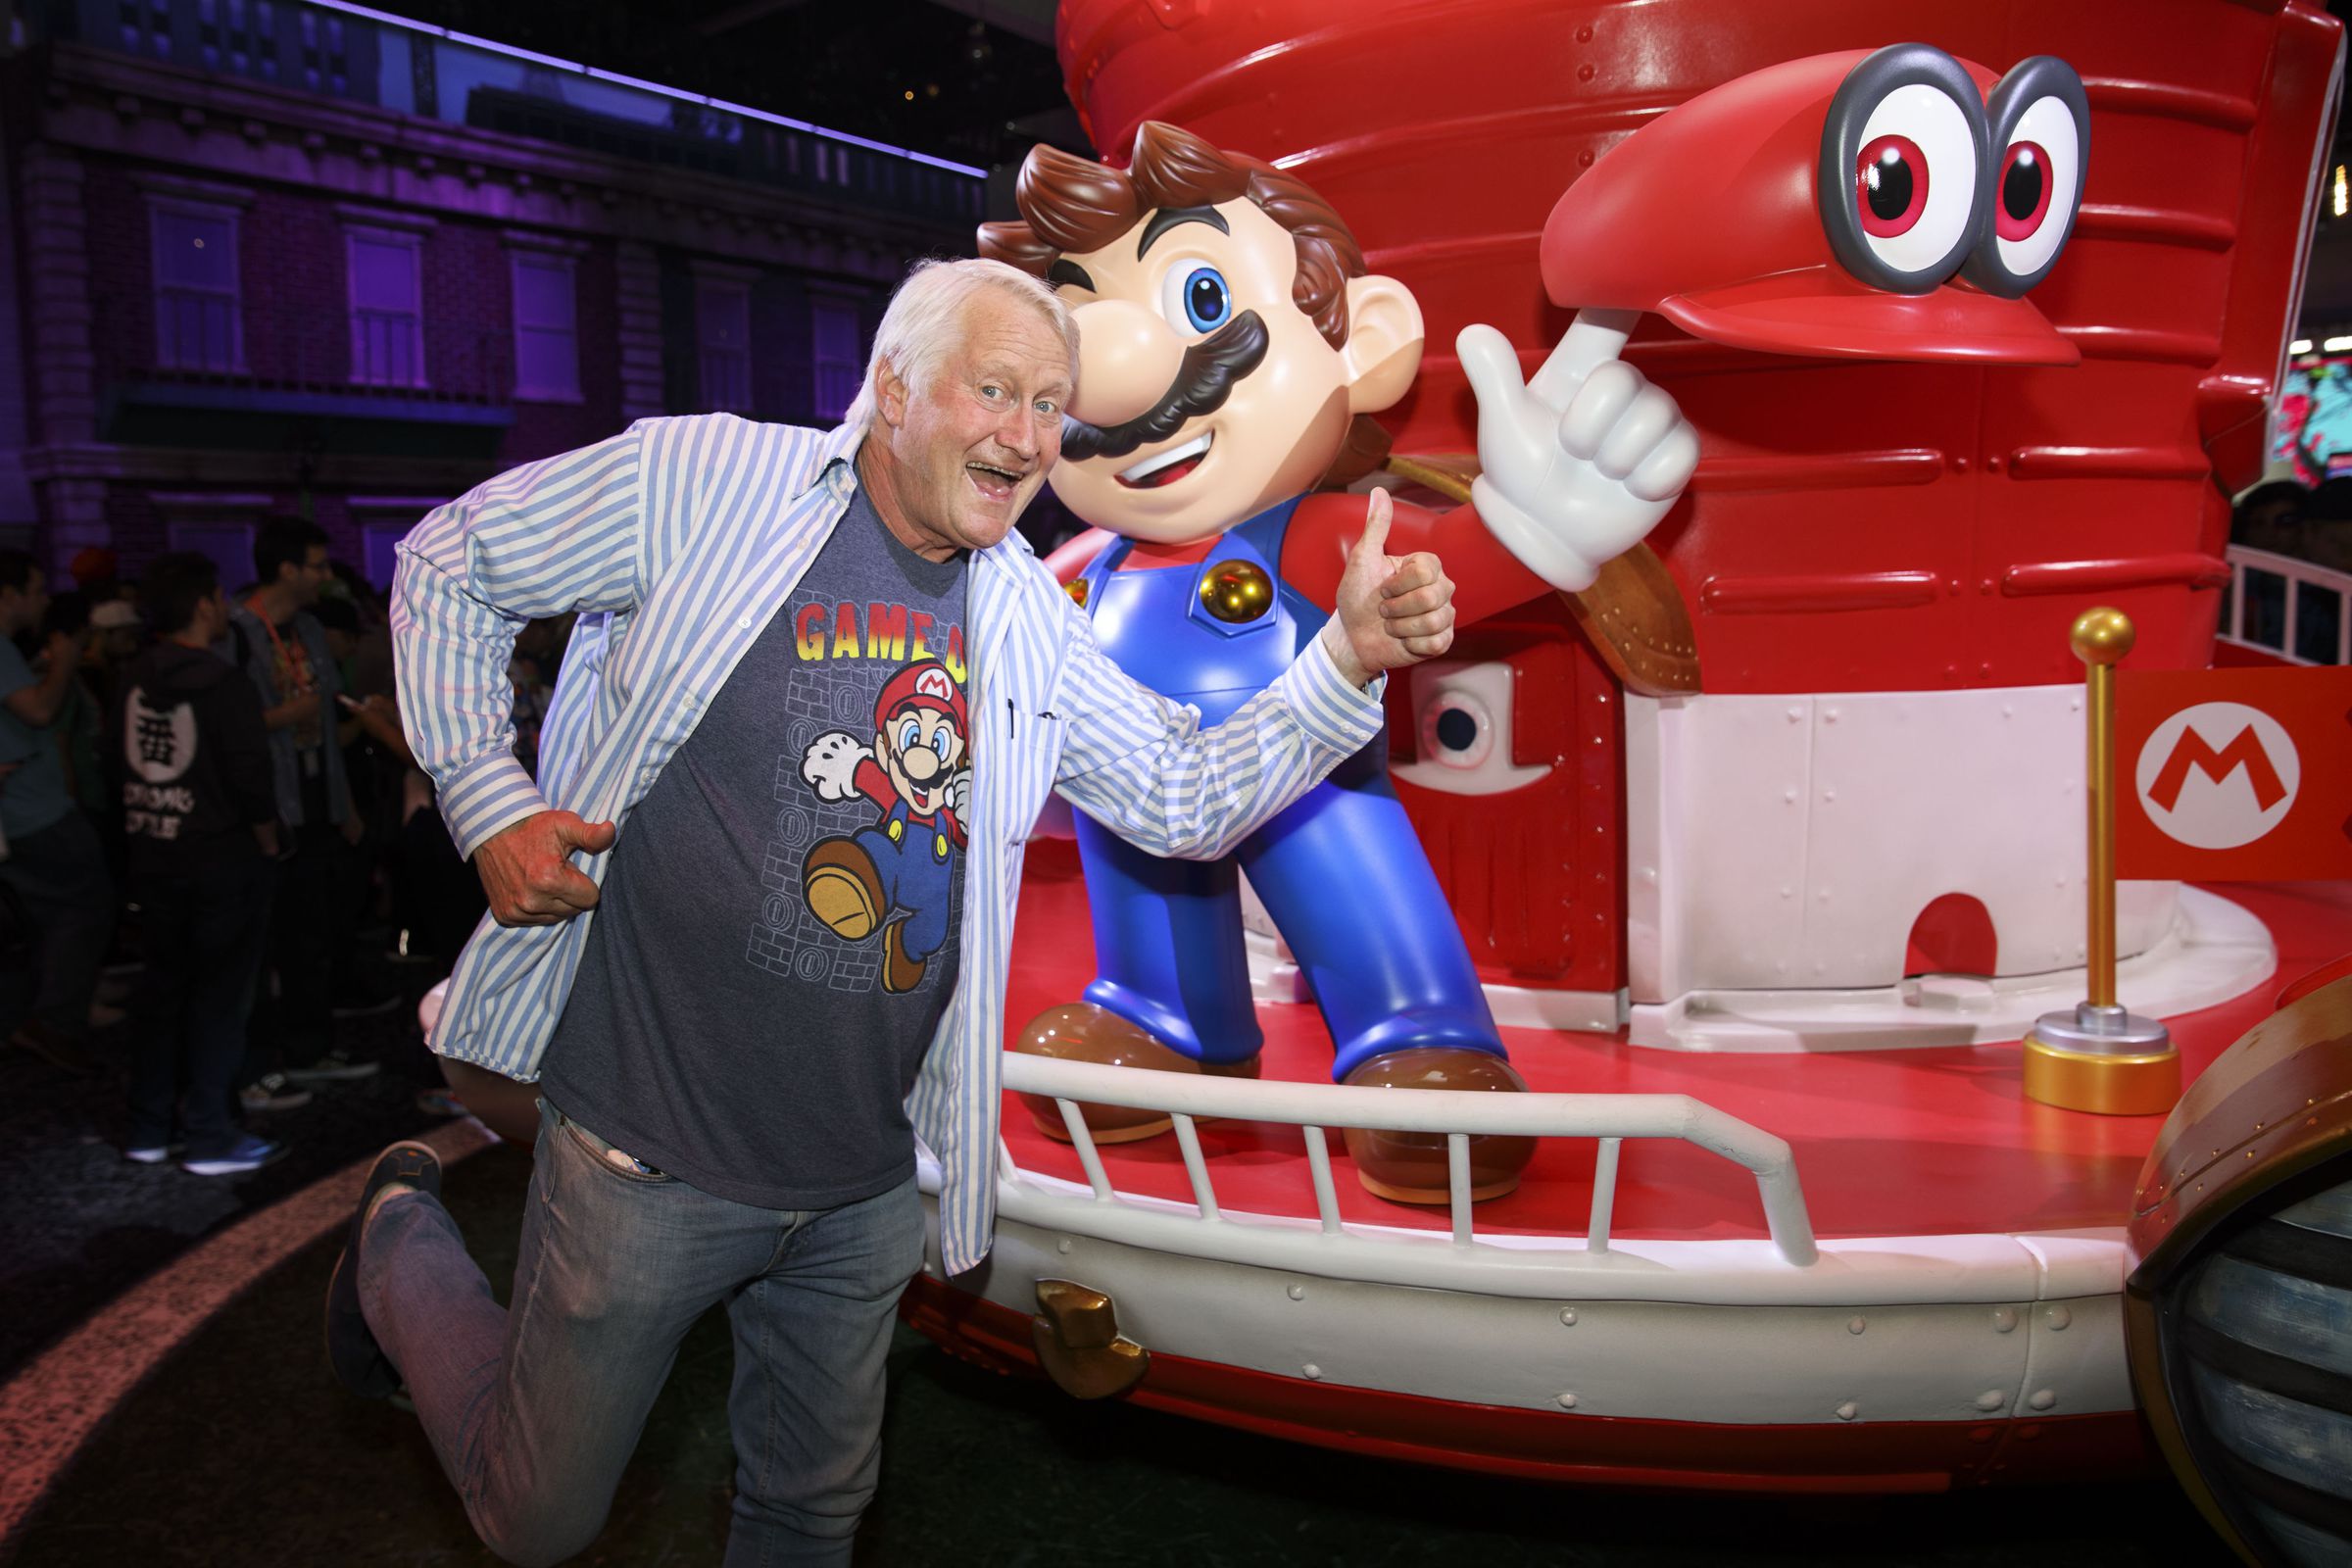 A photo of Mario voice actor Charles Martinet at E3 2017 standing next to a statue of Mario promoting Super Mario Galaxy